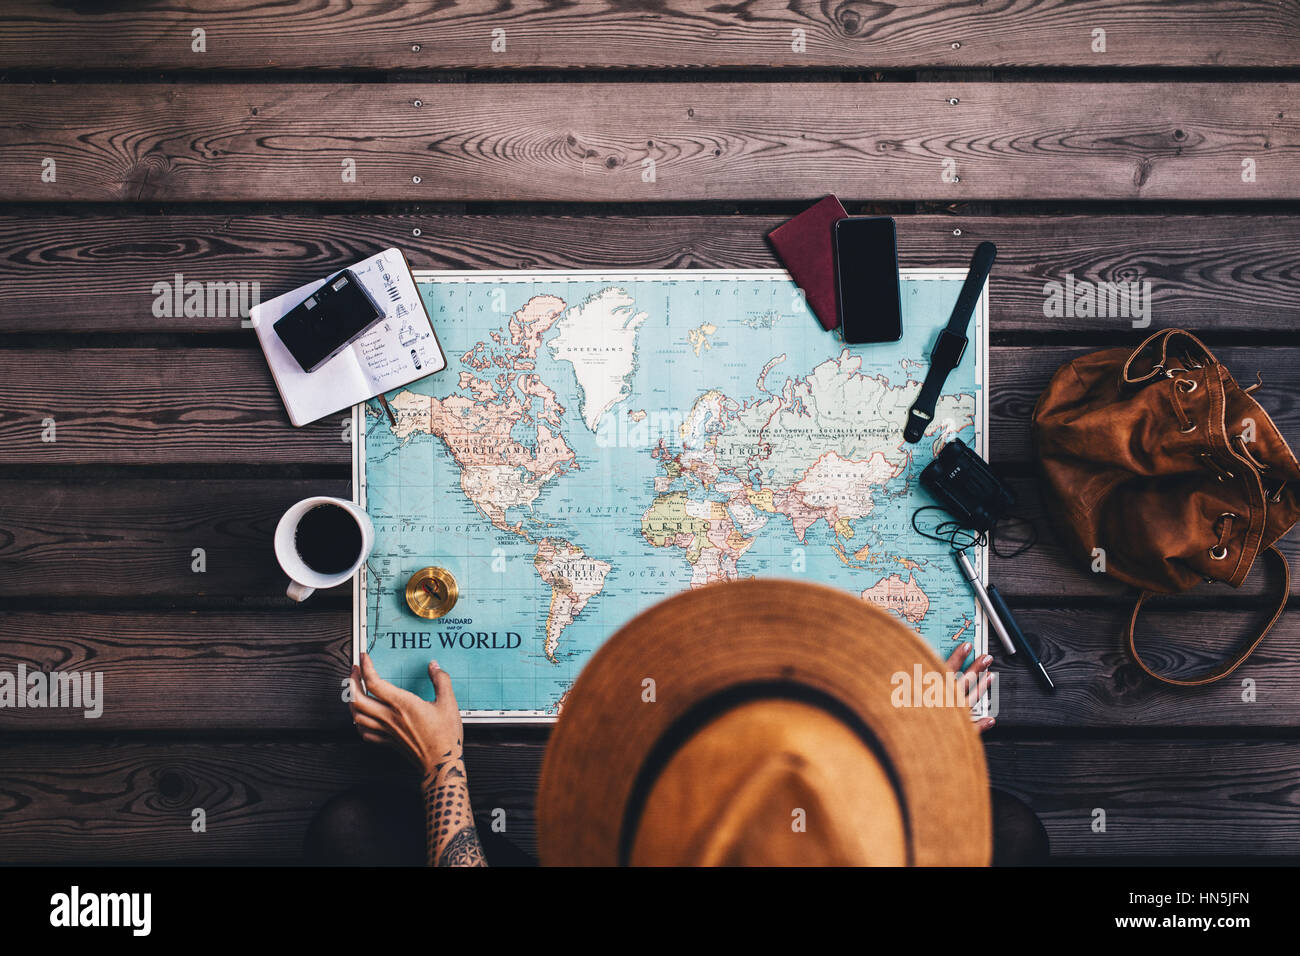 Young woman planning vacation using world map and compass along with other travel accessories. Tourist wearing brown hat looking at the world map. Stock Photo